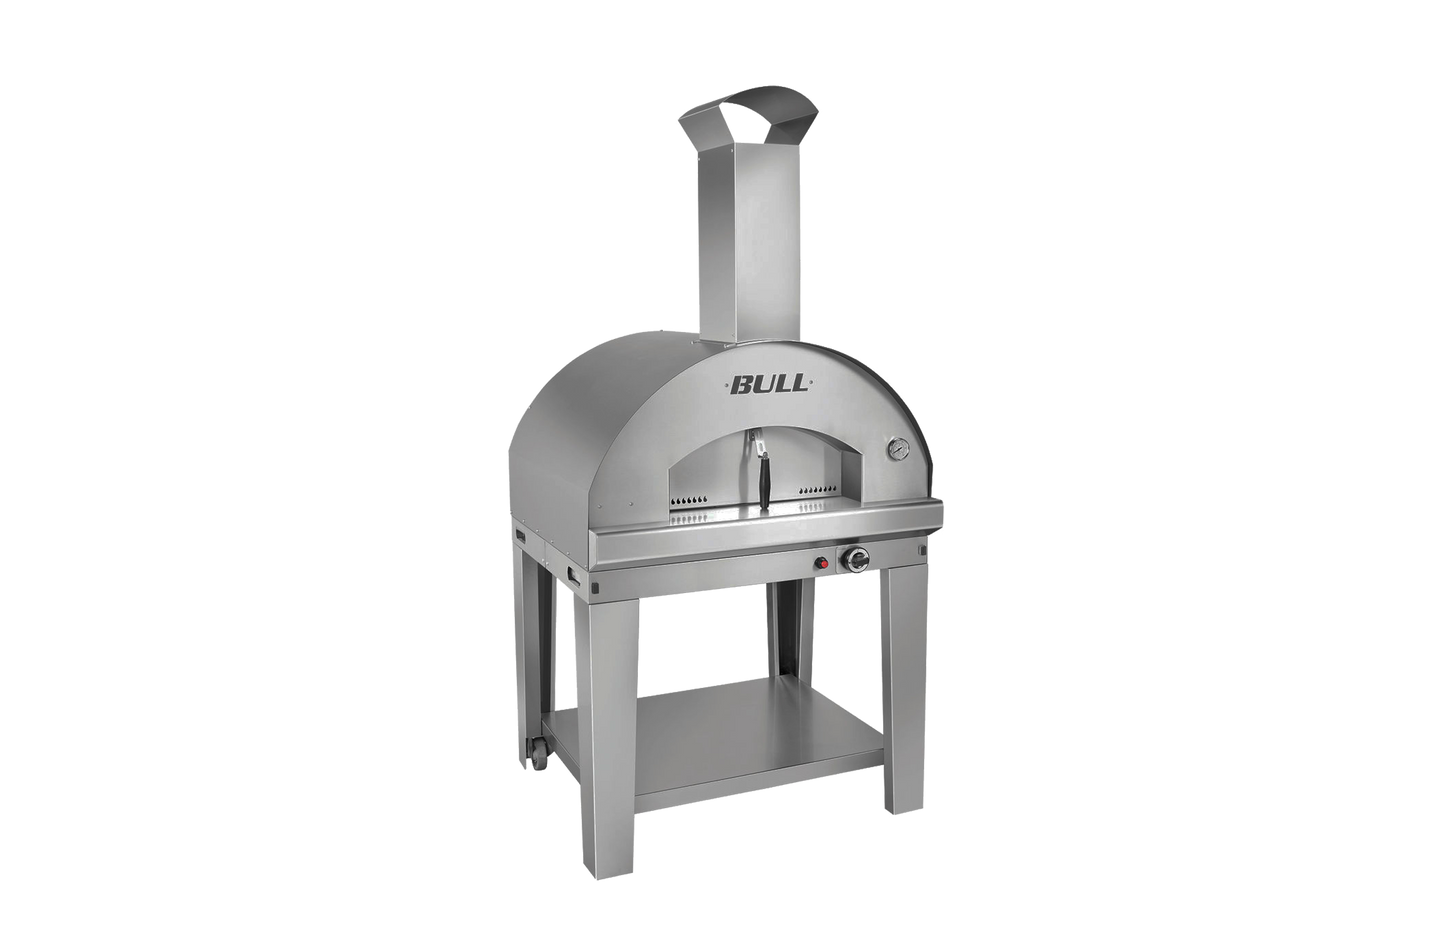 GAS FUELLED Extra Large Pizza Oven 80x60cm Complete Oven And Cart